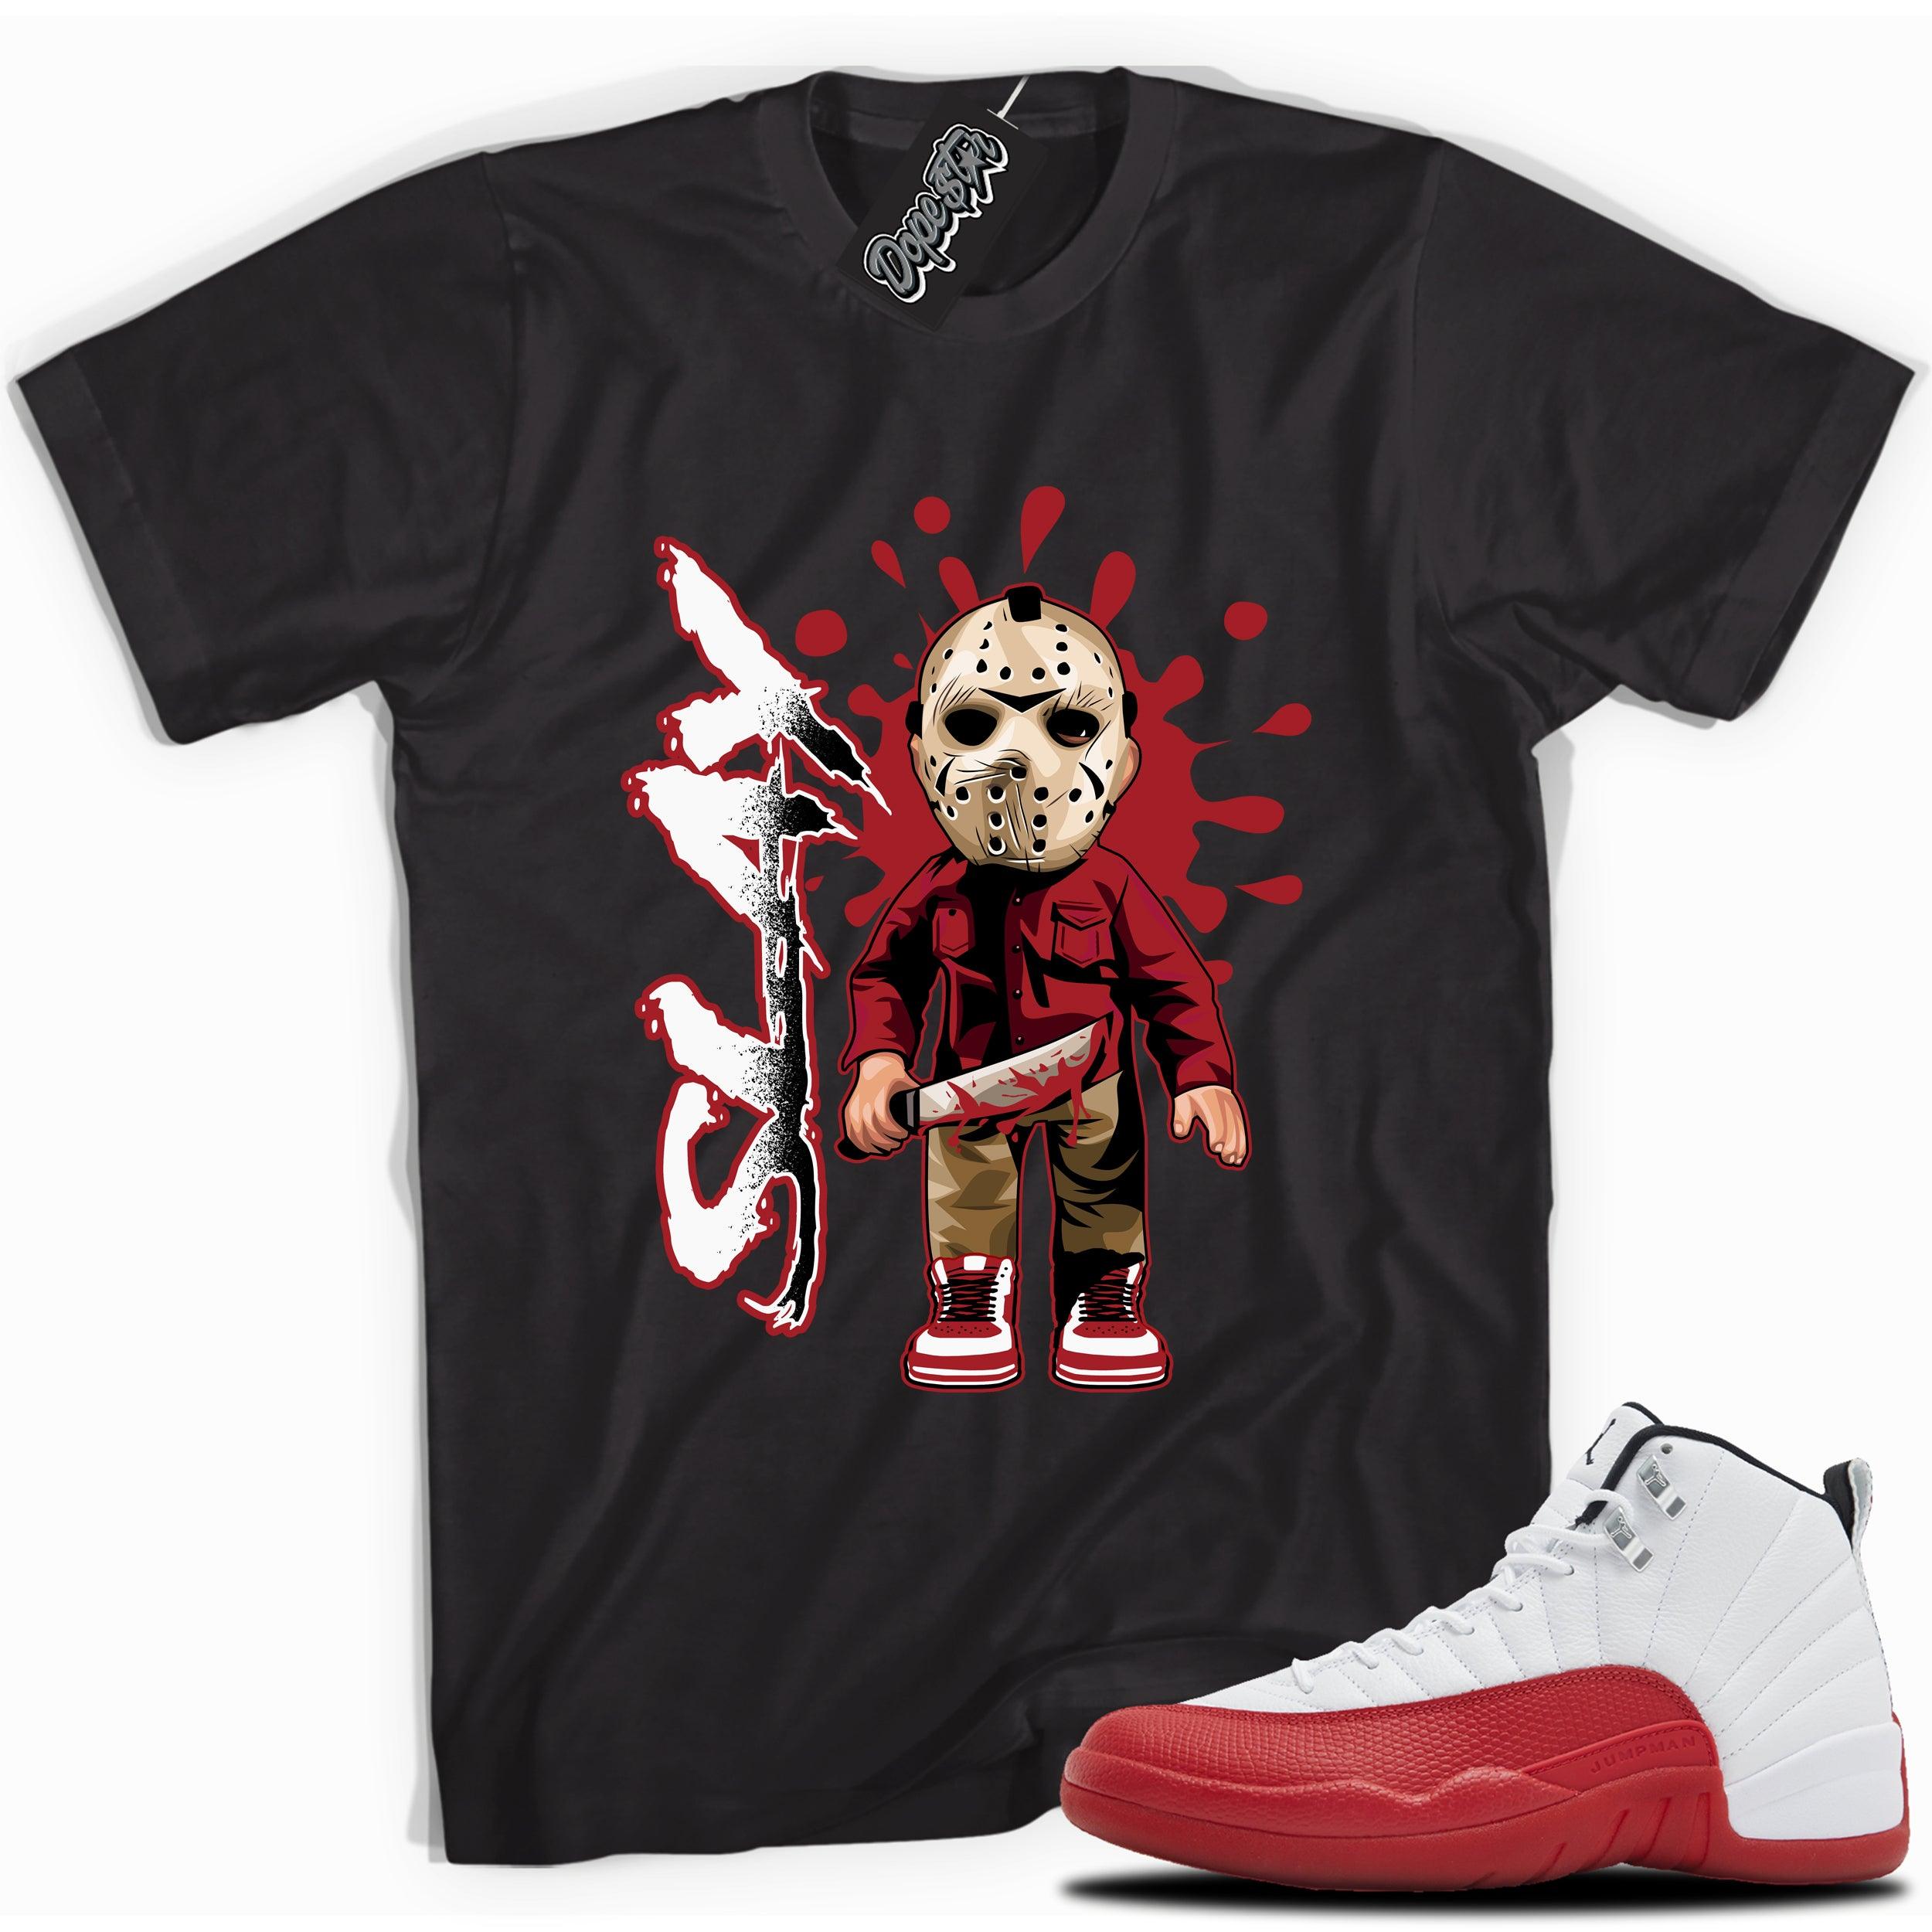 Cool Black graphic tee with “SLAY” print, that perfectly matches Air Jordan 12 Retro Cherry Red 2023 red and white sneakers 